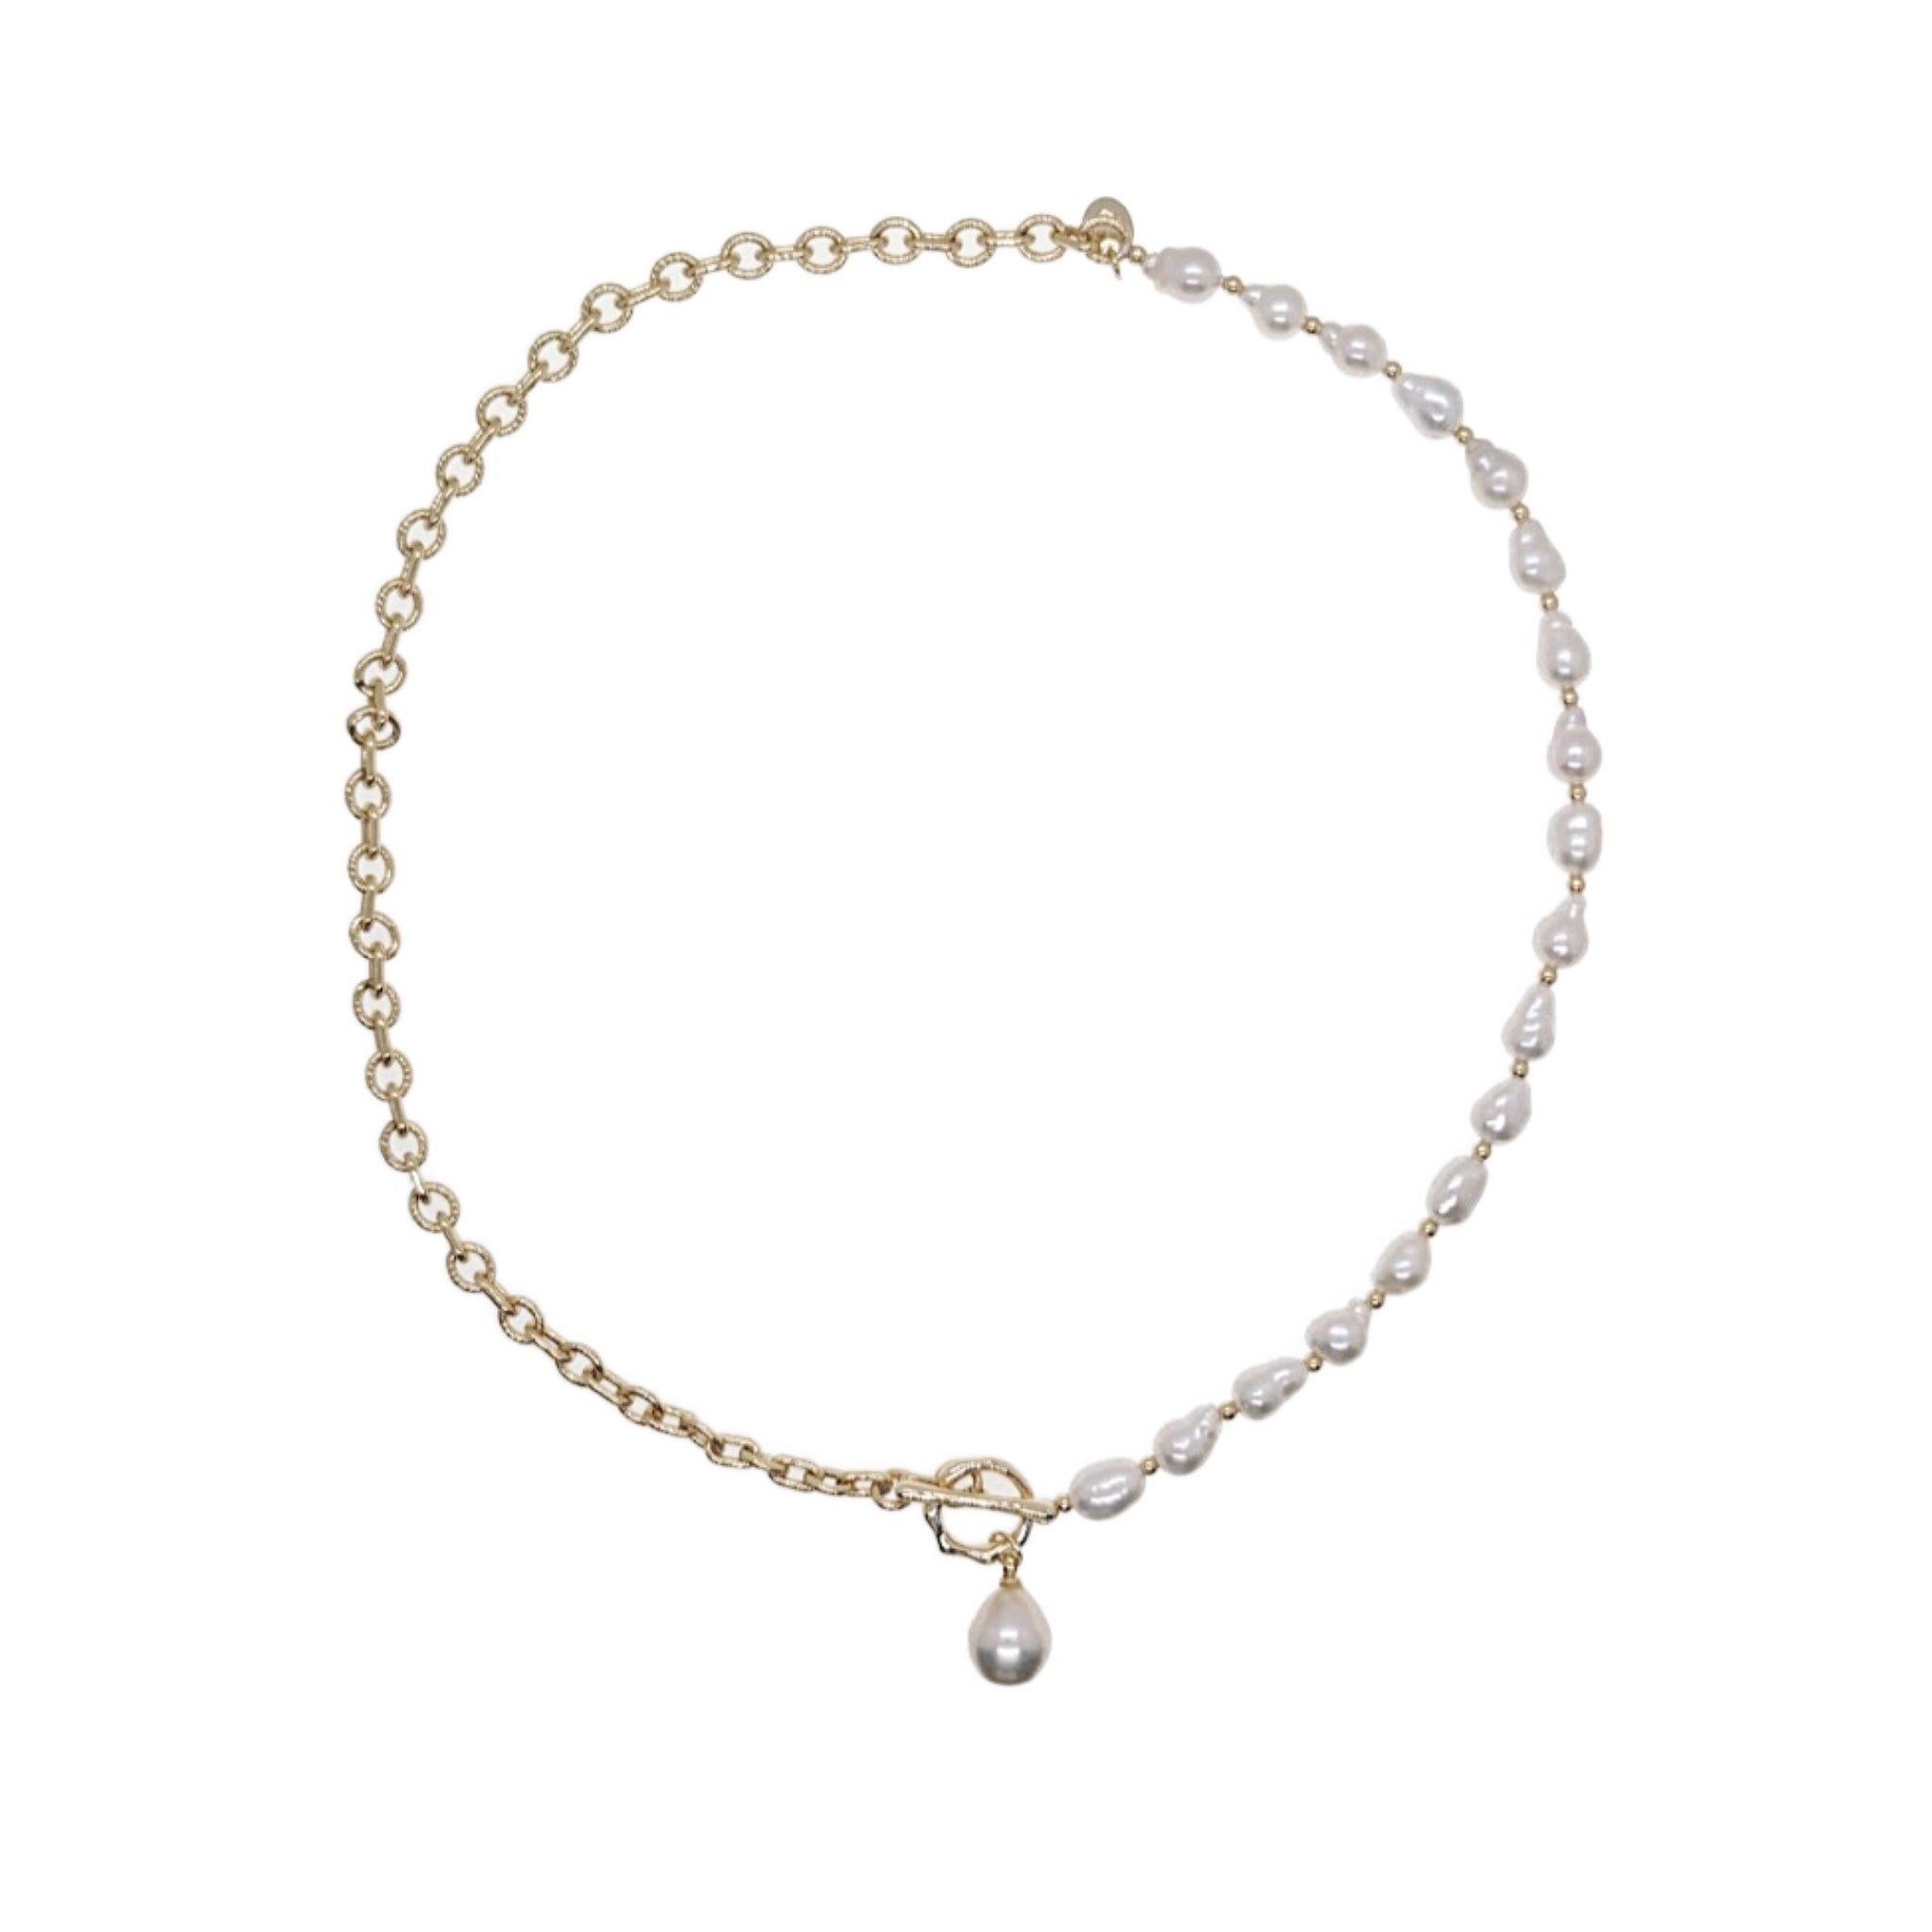 Freshwater Pearl with Pendant Necklace - CHOMEL